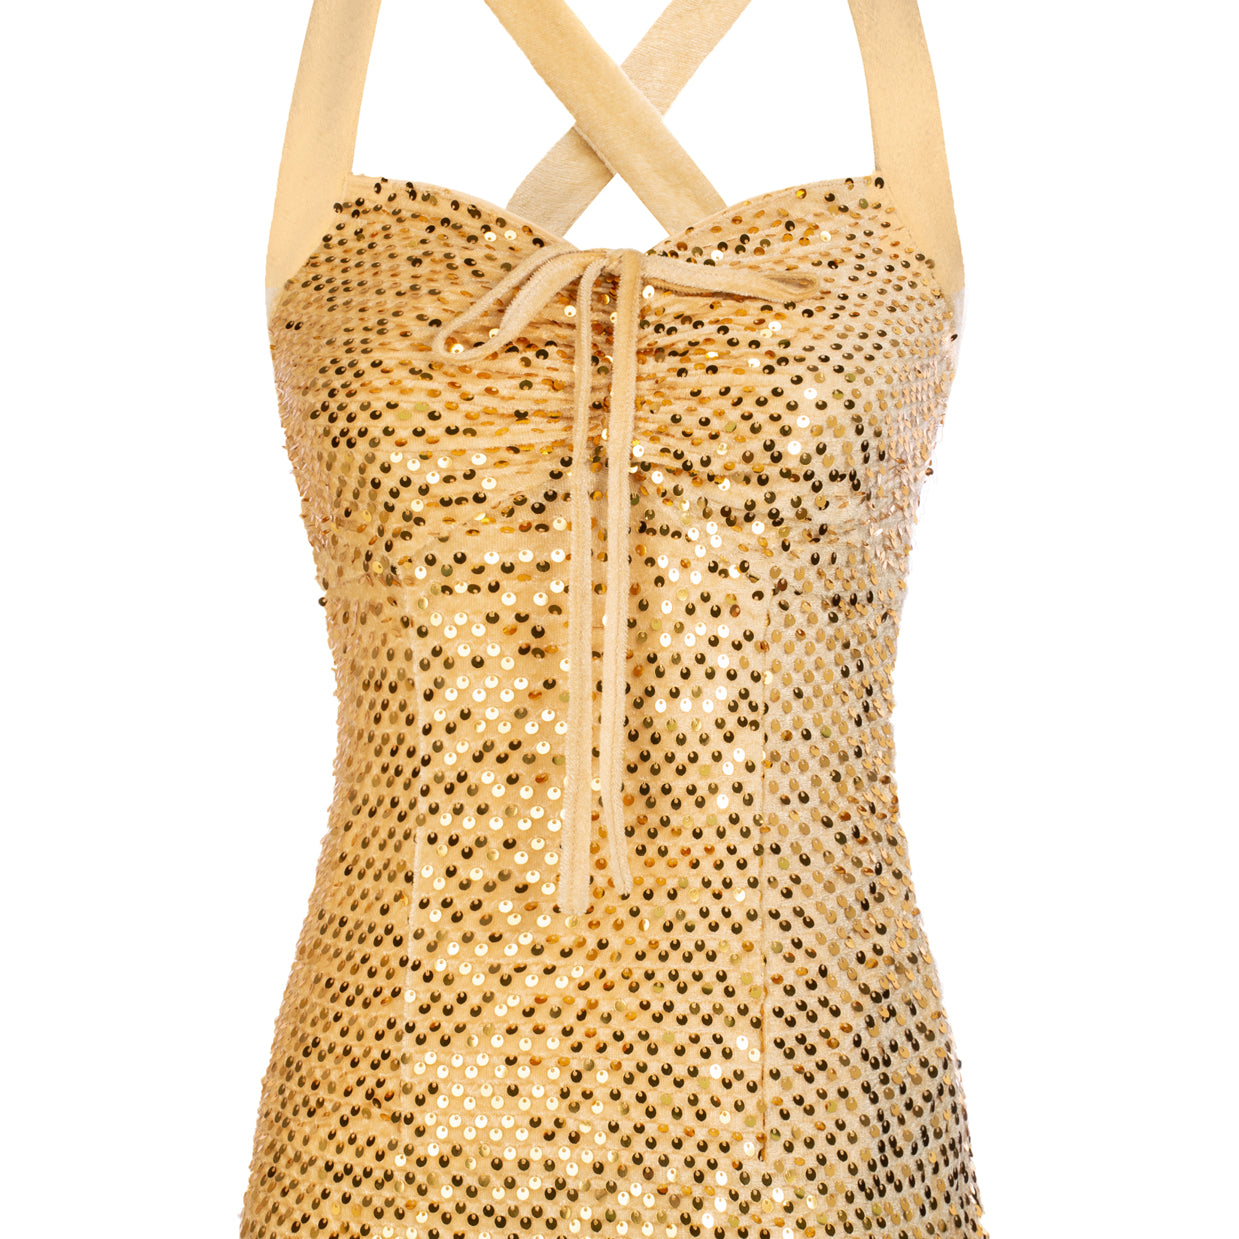 Seckill Offer⌛Sparkly Sequin Tops for Women Velvet Strappy Camis Tank Tops Night Party